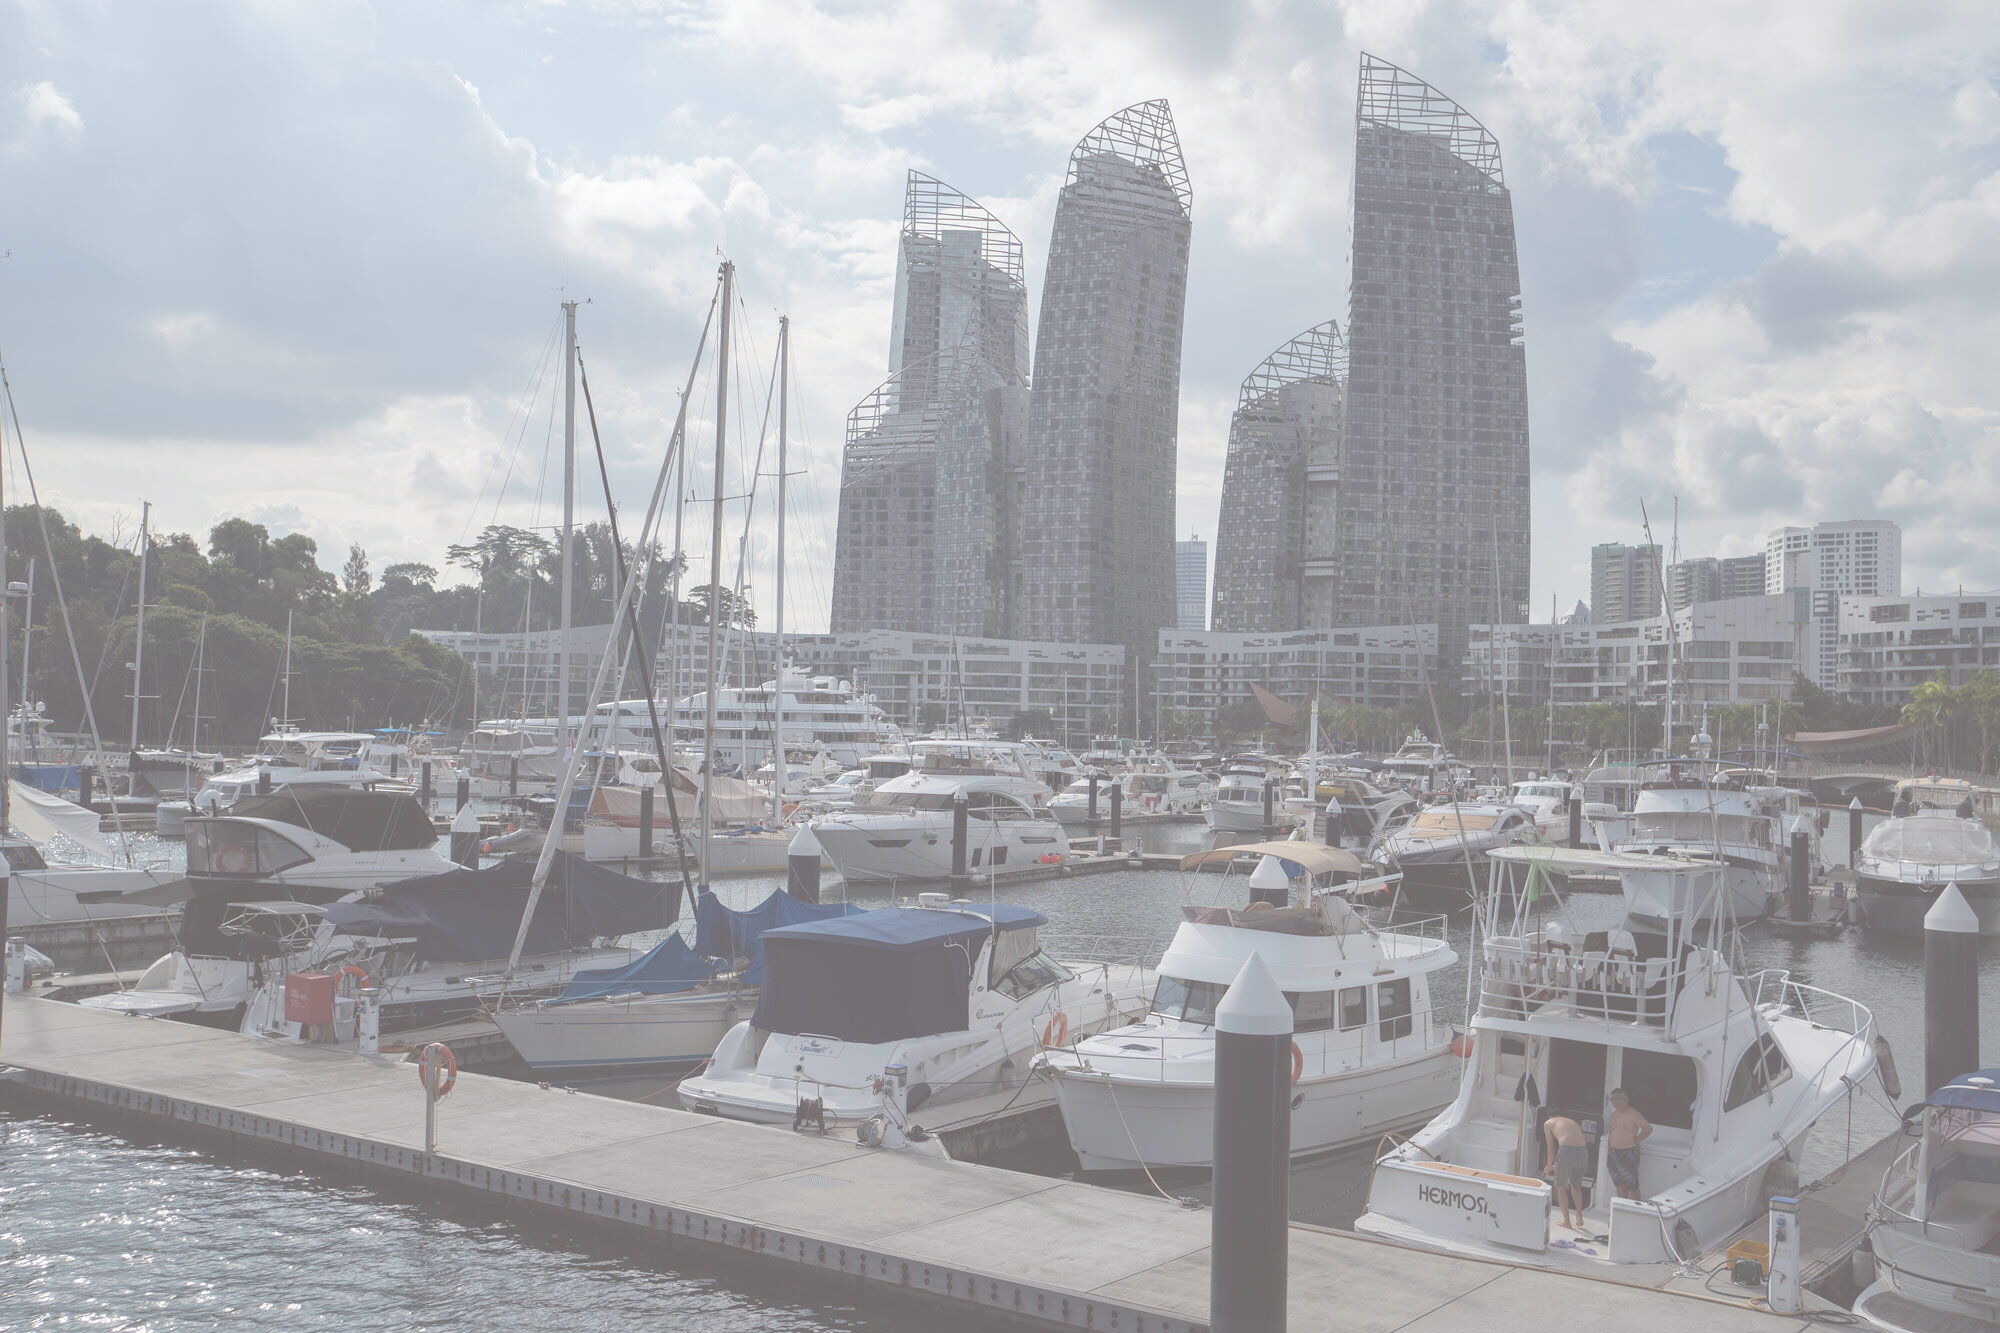 Relaxing marina vibes in Keppel Bay | Singapore Local Guide